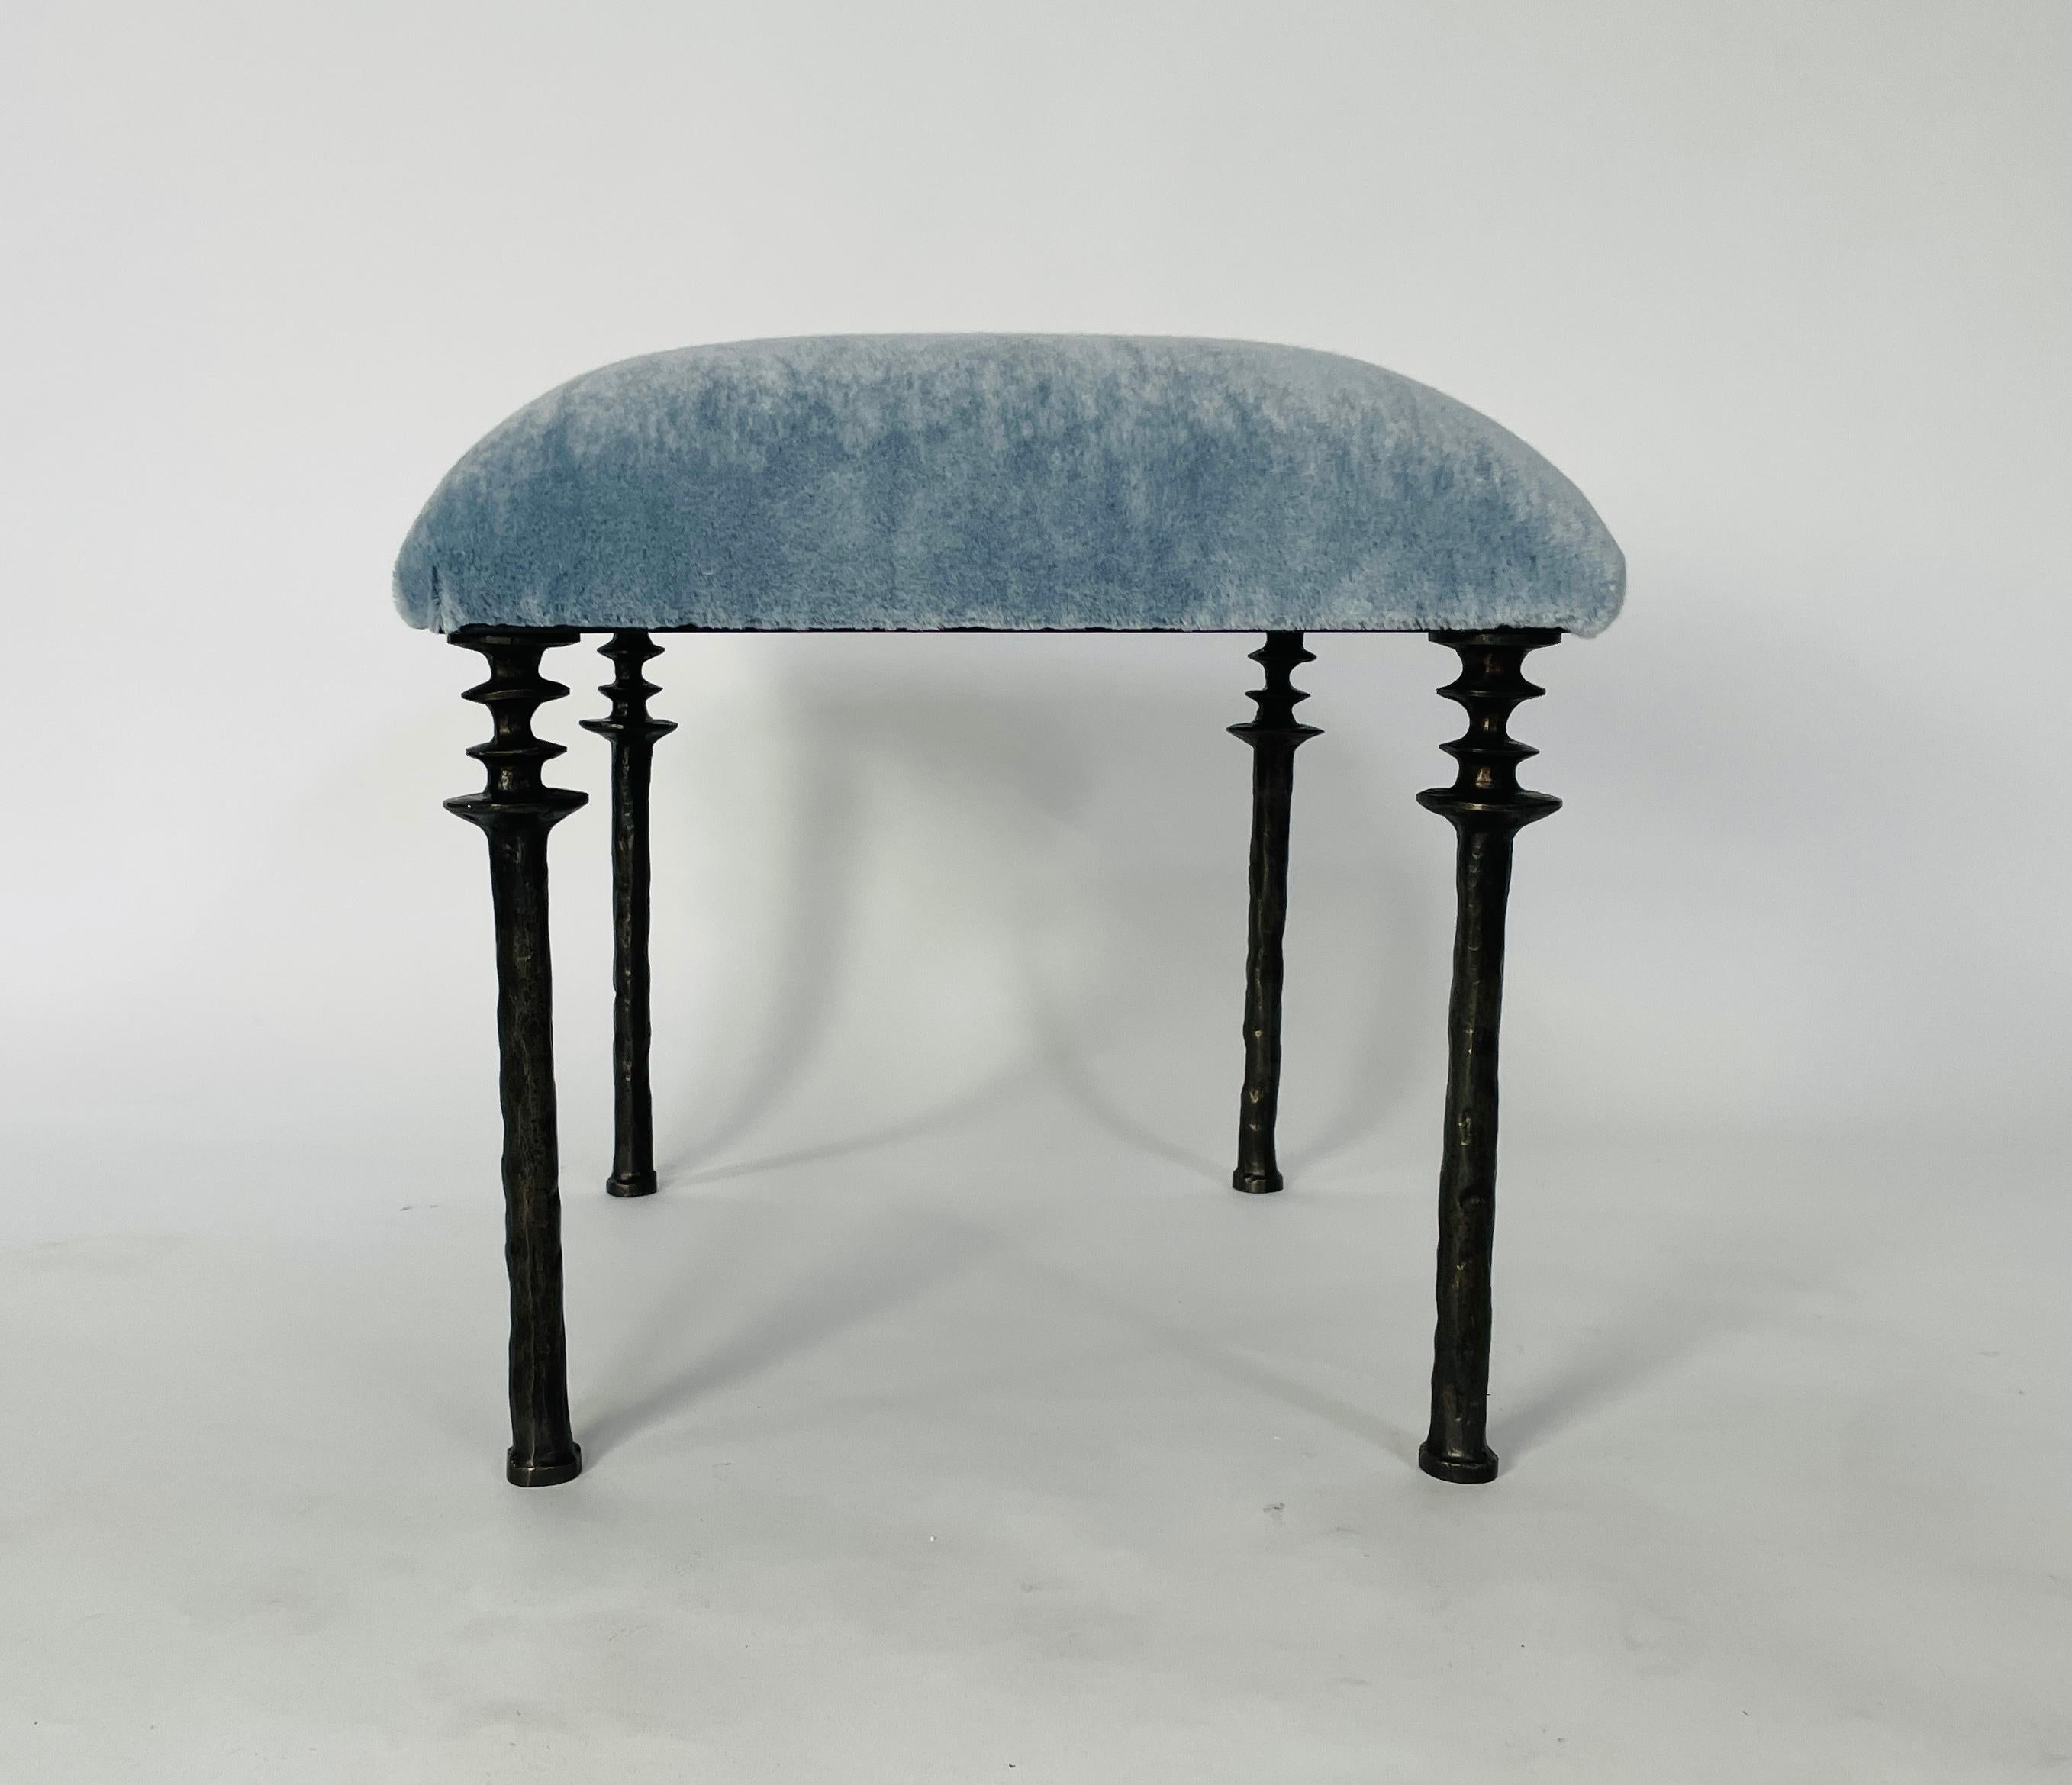 Contemporary Pair of Sorgue Stools, by Bourgeois Boheme Atelier, Blue Mohair Upholstery